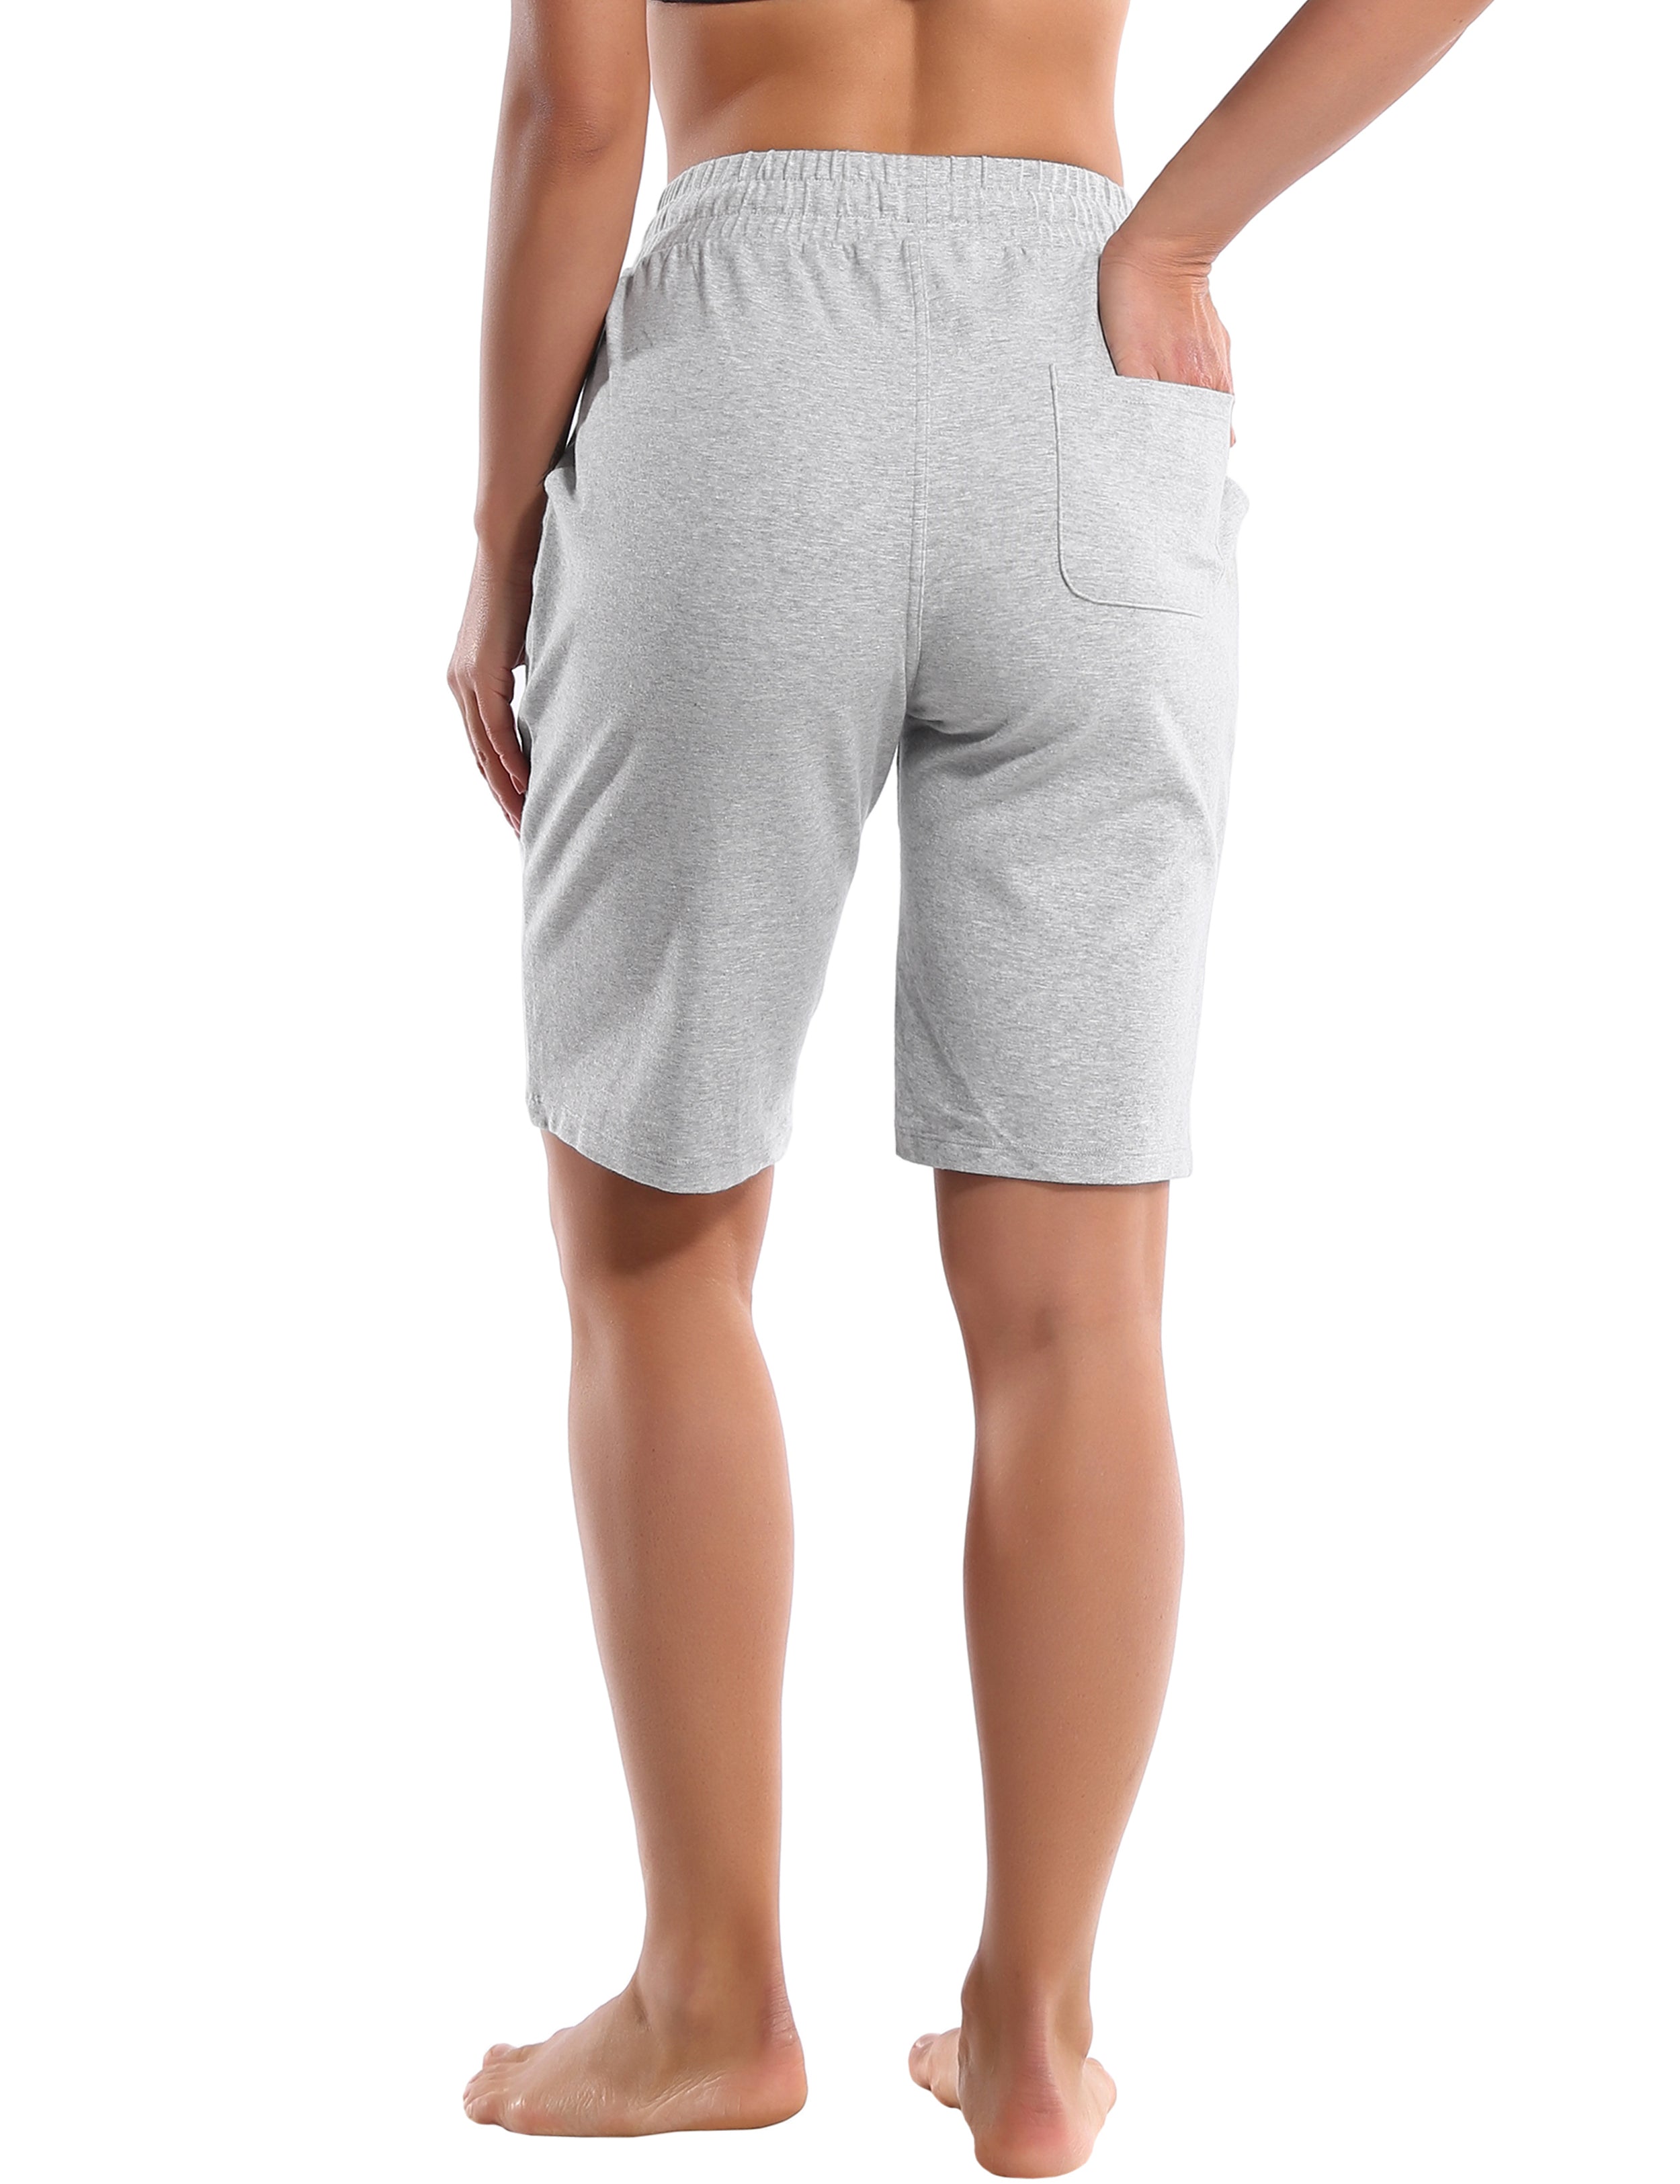 10" Joggers Shorts heathergray 90% Cotton, 10% Spandex Soft and Elastic Drawstring closure Lightweight & breathable fabric wicks away sweat to keep you comfortable Elastic waistband with internal drawcord for a snug, adjustable fit Big side pockets are available for 4.7", 5", 5.5" mobile phone Reflective logo helps you stand out in low light Perfect for any types of outdoor exercises and indoor fitness,like yoga,running,walking,jogging,lounging,workout,gym fitness,casual use,etc